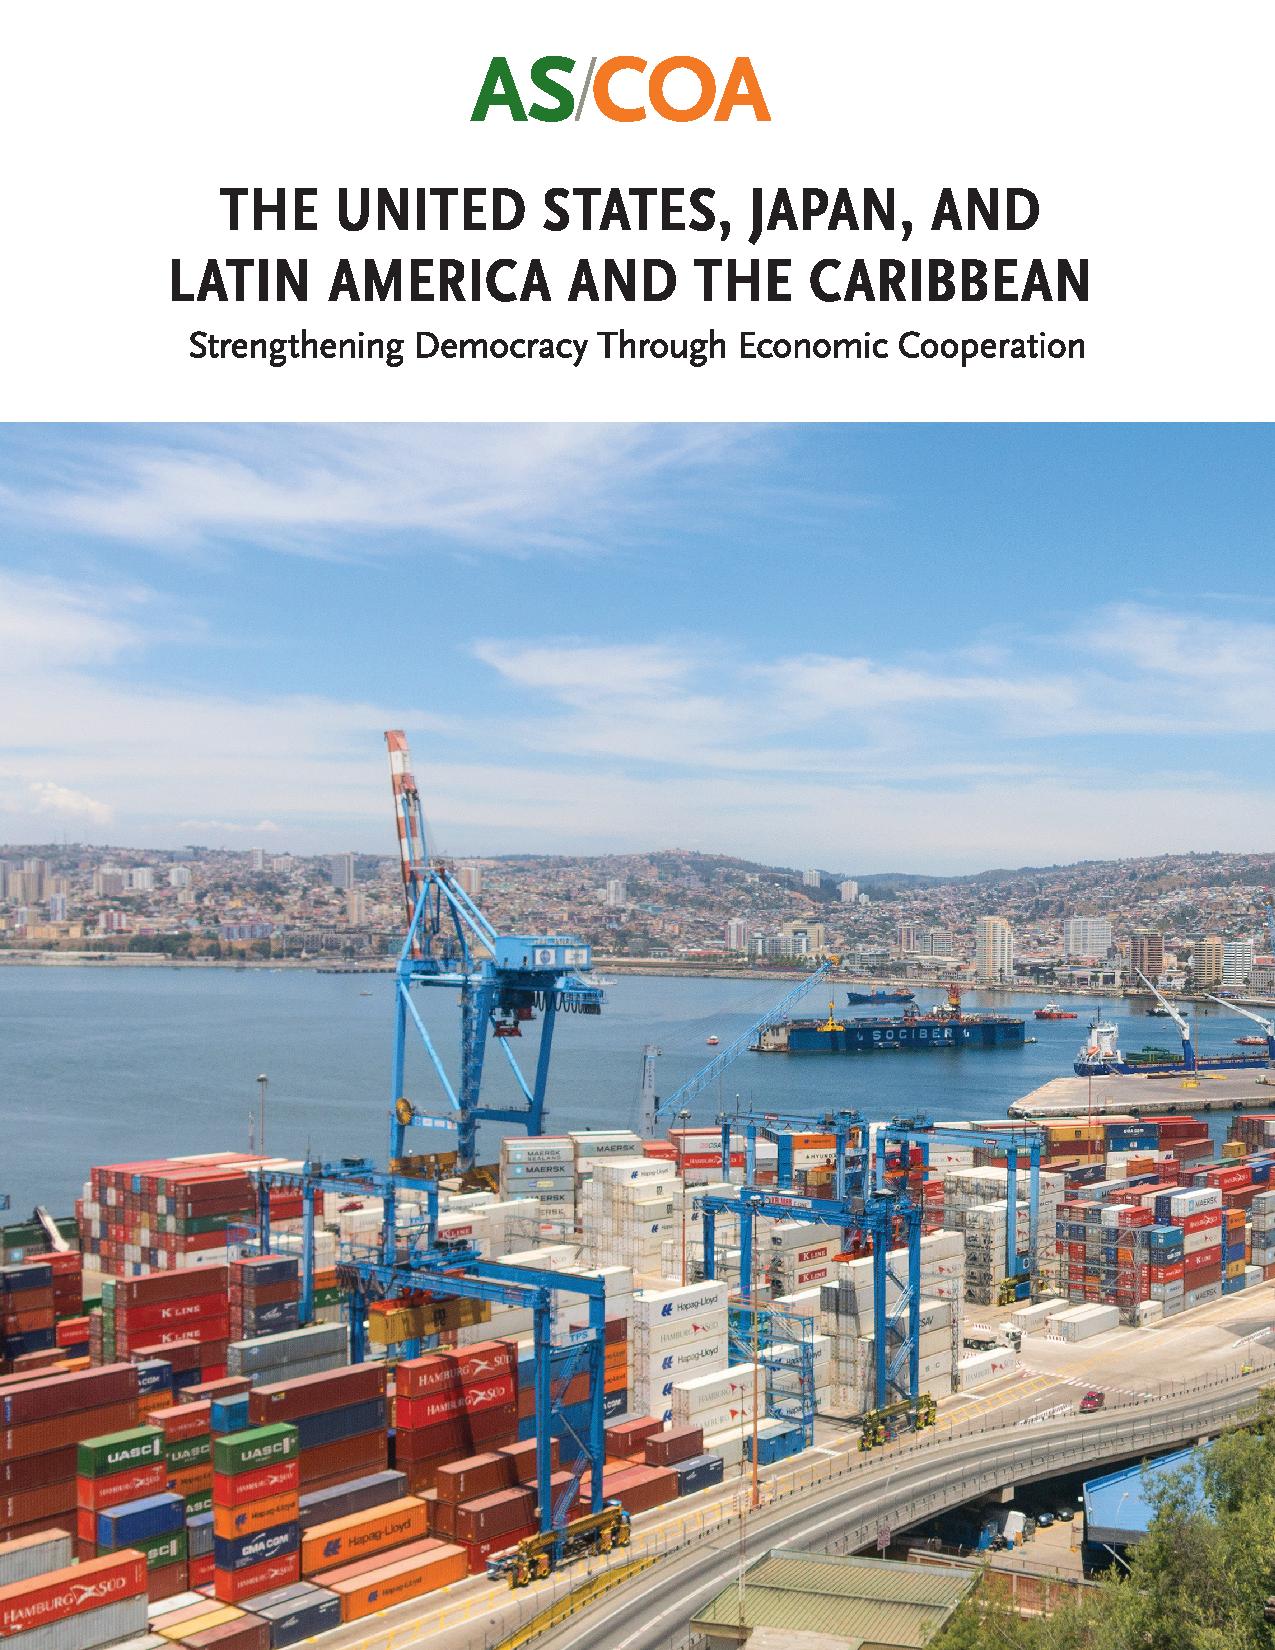 The United States, Japan, and Latin America and the Caribbean: Strengthening Democracy Through Economic Cooperation